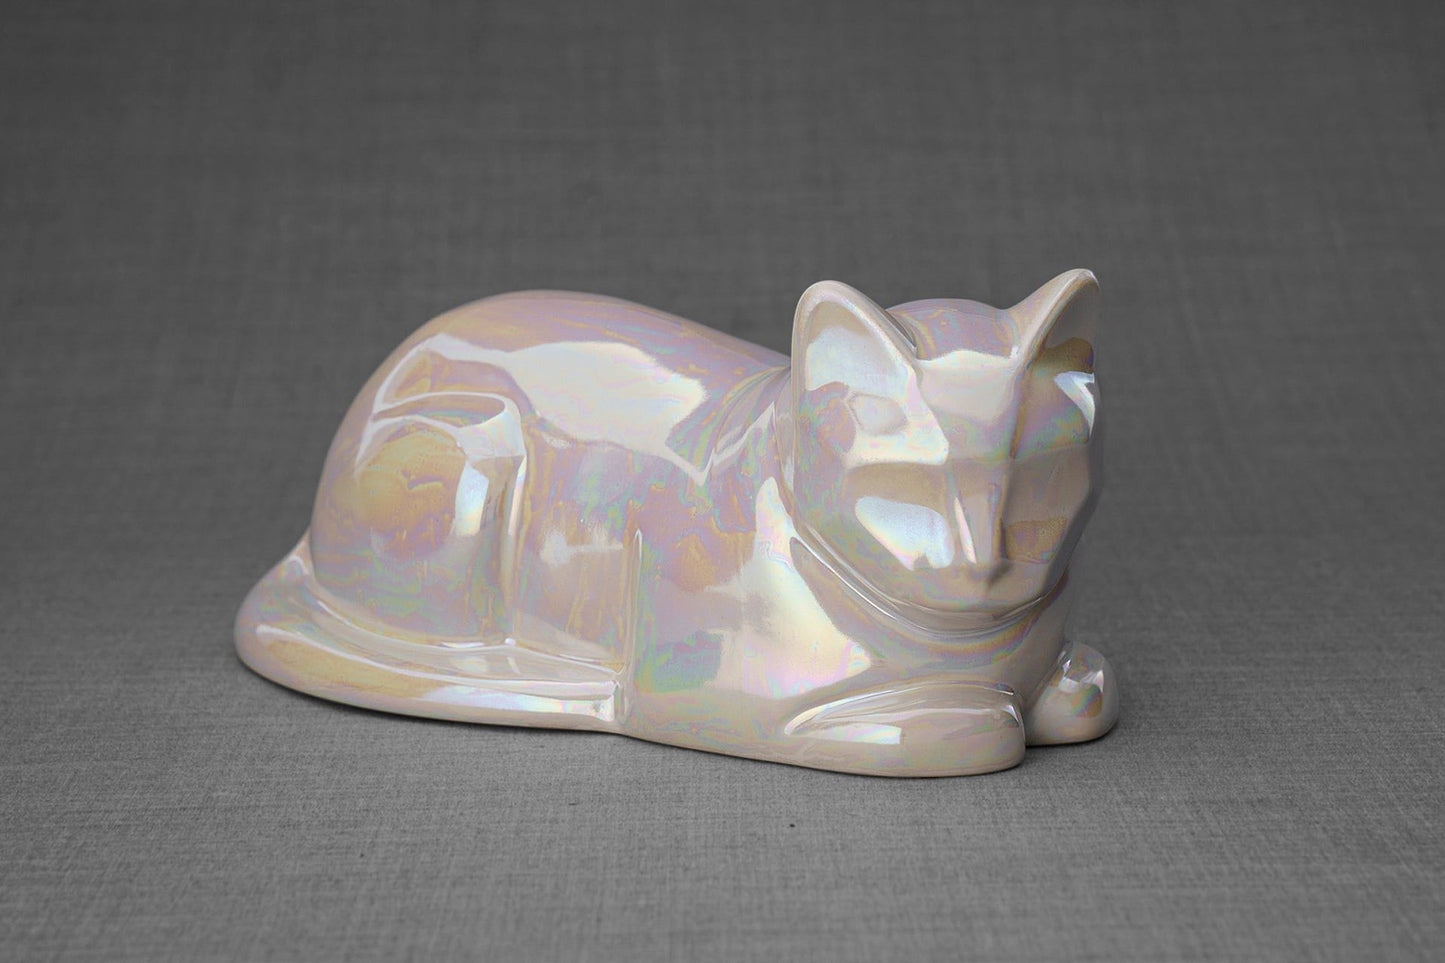 Pulvis Art Urns Pet Urn Cat Cremation Urn for Ashes - Pearly White | Ceramic | Handmade